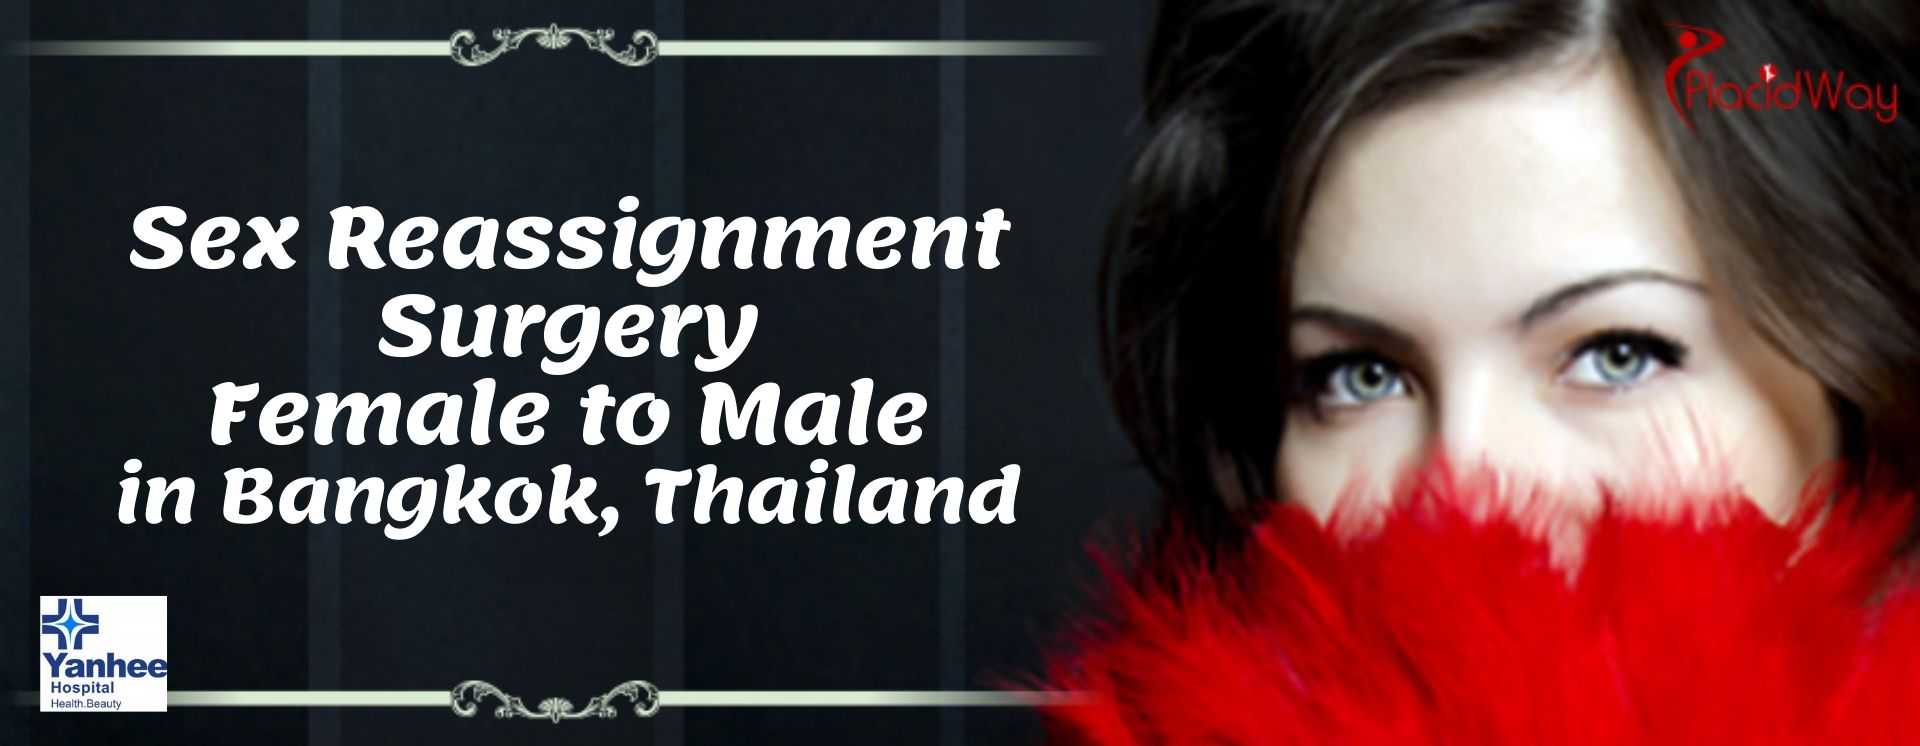 Sex Reassignment Surgery Female to Male in Bangkok Thailand